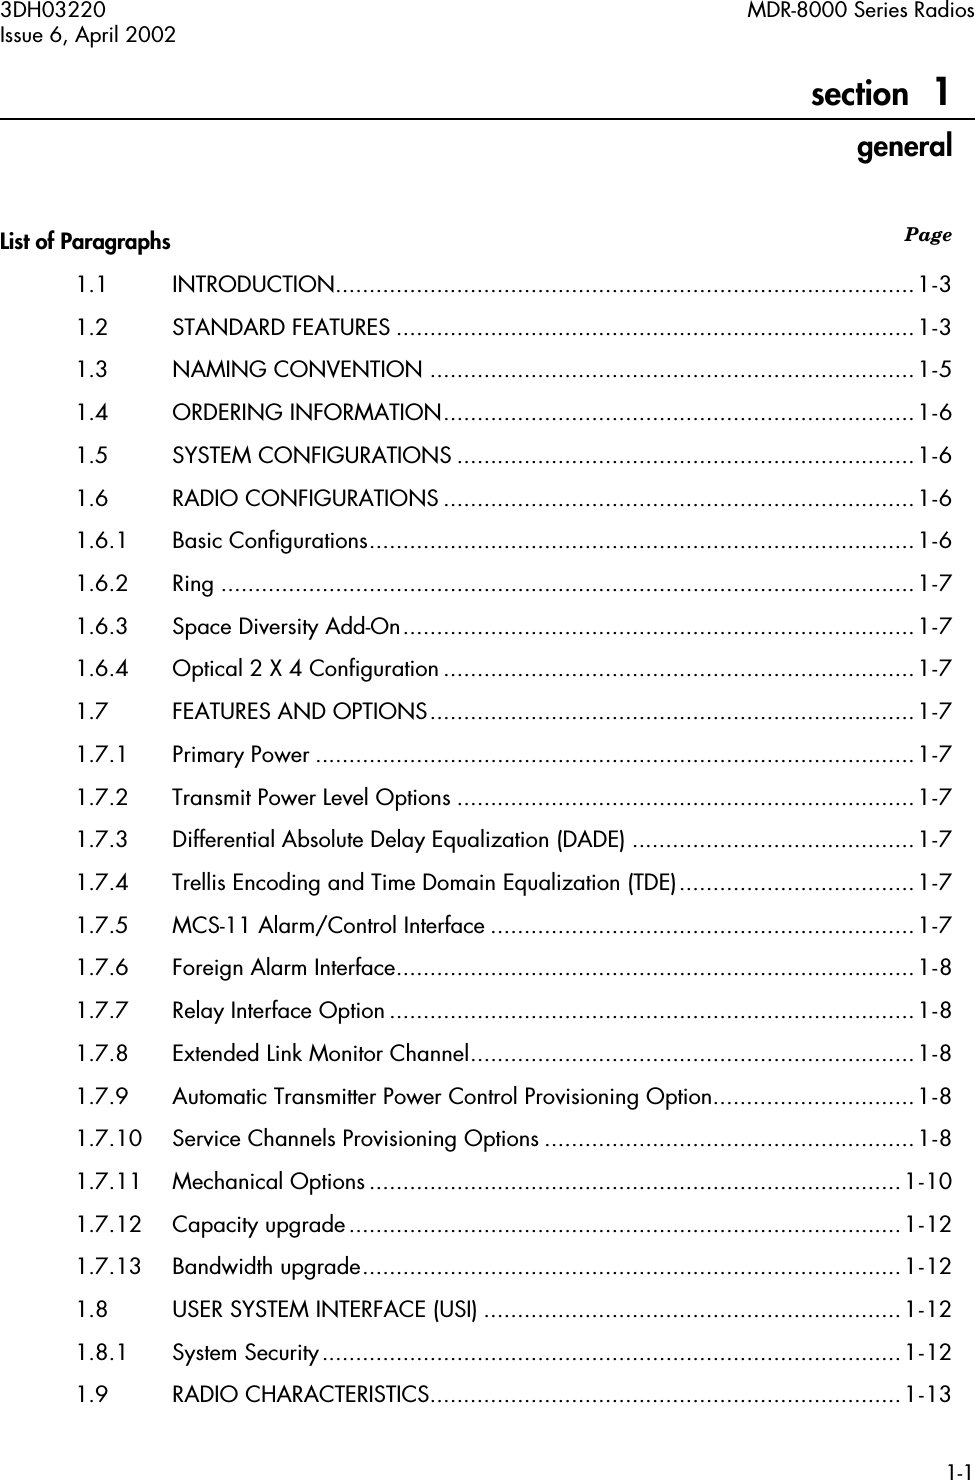  3DH03220 MDR-8000 Series RadiosIssue 6, April 20021-1 Page   section   1 general List of Paragraphs 1.1 INTRODUCTION......................................................................................1-31.2 STANDARD FEATURES .............................................................................1-31.3 NAMING CONVENTION ........................................................................1-51.4 ORDERING INFORMATION......................................................................1-61.5 SYSTEM CONFIGURATIONS ....................................................................1-61.6 RADIO CONFIGURATIONS ......................................................................1-61.6.1 Basic Configurations.................................................................................1-61.6.2 Ring .......................................................................................................1-71.6.3 Space Diversity Add-On............................................................................1-71.6.4 Optical 2 X 4 Configuration ......................................................................1-71.7 FEATURES AND OPTIONS........................................................................1-71.7.1 Primary Power .........................................................................................1-71.7.2 Transmit Power Level Options ....................................................................1-71.7.3 Differential Absolute Delay Equalization (DADE) ..........................................1-71.7.4 Trellis Encoding and Time Domain Equalization (TDE)...................................1-71.7.5 MCS-11 Alarm/Control Interface ...............................................................1-71.7.6 Foreign Alarm Interface.............................................................................1-81.7.7 Relay Interface Option..............................................................................1-81.7.8 Extended Link Monitor Channel..................................................................1-81.7.9 Automatic Transmitter Power Control Provisioning Option..............................1-81.7.10 Service Channels Provisioning Options .......................................................1-81.7.11 Mechanical Options ...............................................................................1-101.7.12 Capacity upgrade..................................................................................1-121.7.13 Bandwidth upgrade................................................................................1-121.8 USER SYSTEM INTERFACE (USI) ..............................................................1-121.8.1 System Security......................................................................................1-121.9 RADIO CHARACTERISTICS......................................................................1-13